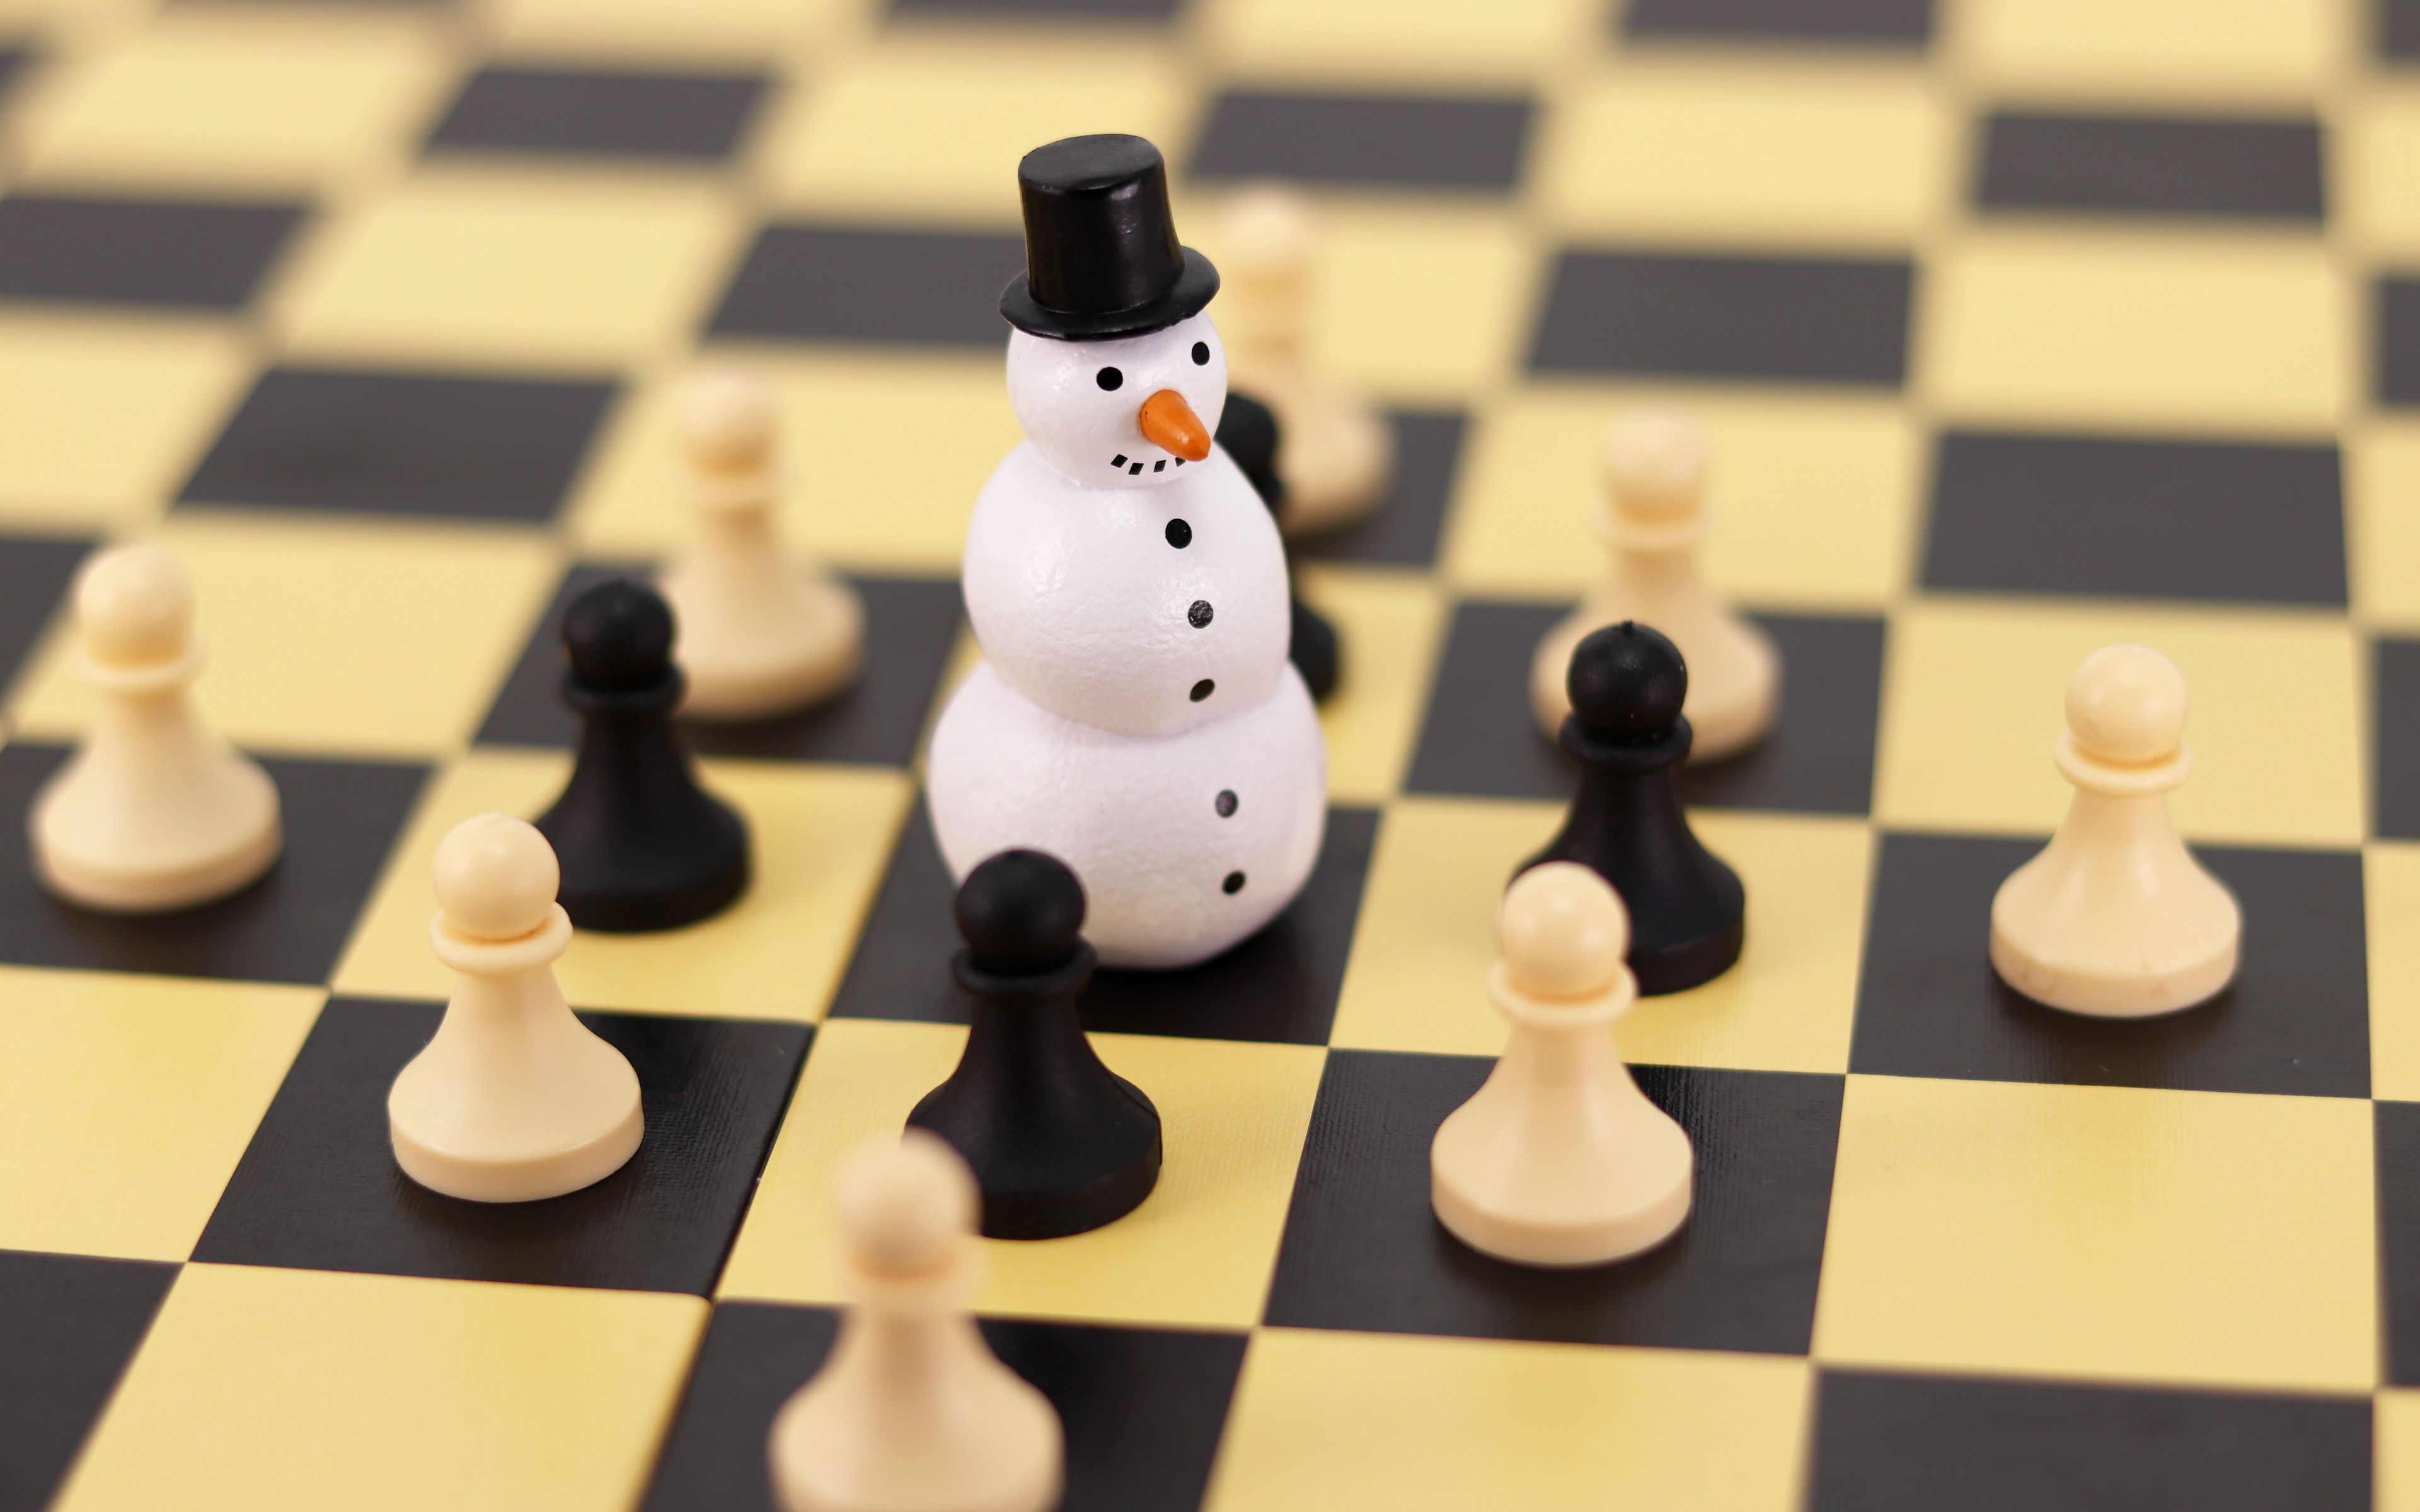 Download wallpaper 3840x2400 chess, snowman, figures, pawns, chess board, game 4k ultra HD 16:10 HD background